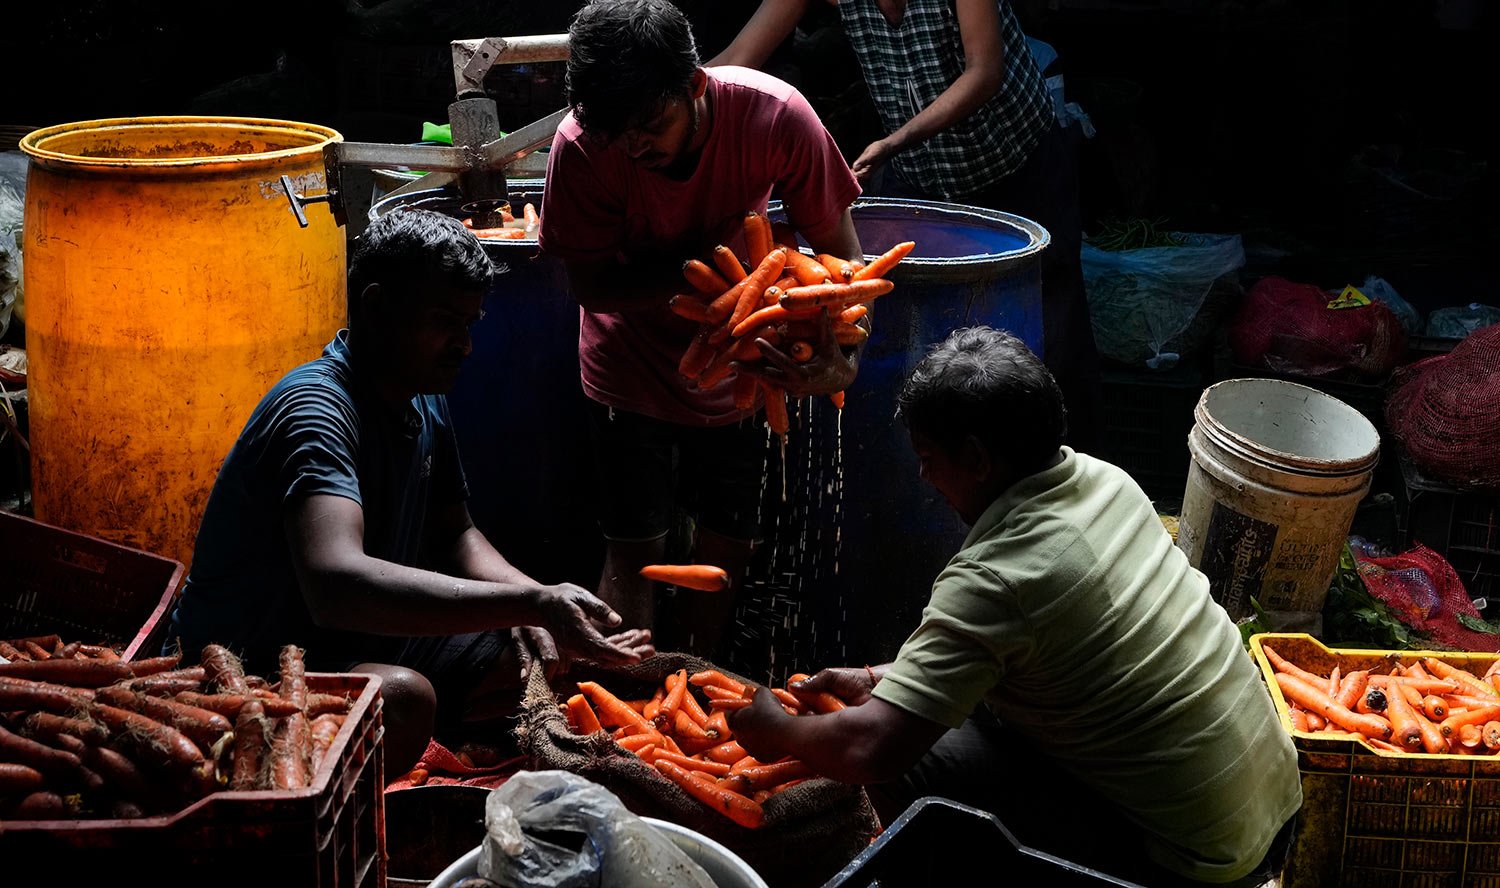  Workers sort out vegetables at a wholesale market in Mumbai, India, Friday, Aug. 5, 2022.  (AP Photo/Rajanish kakade) 